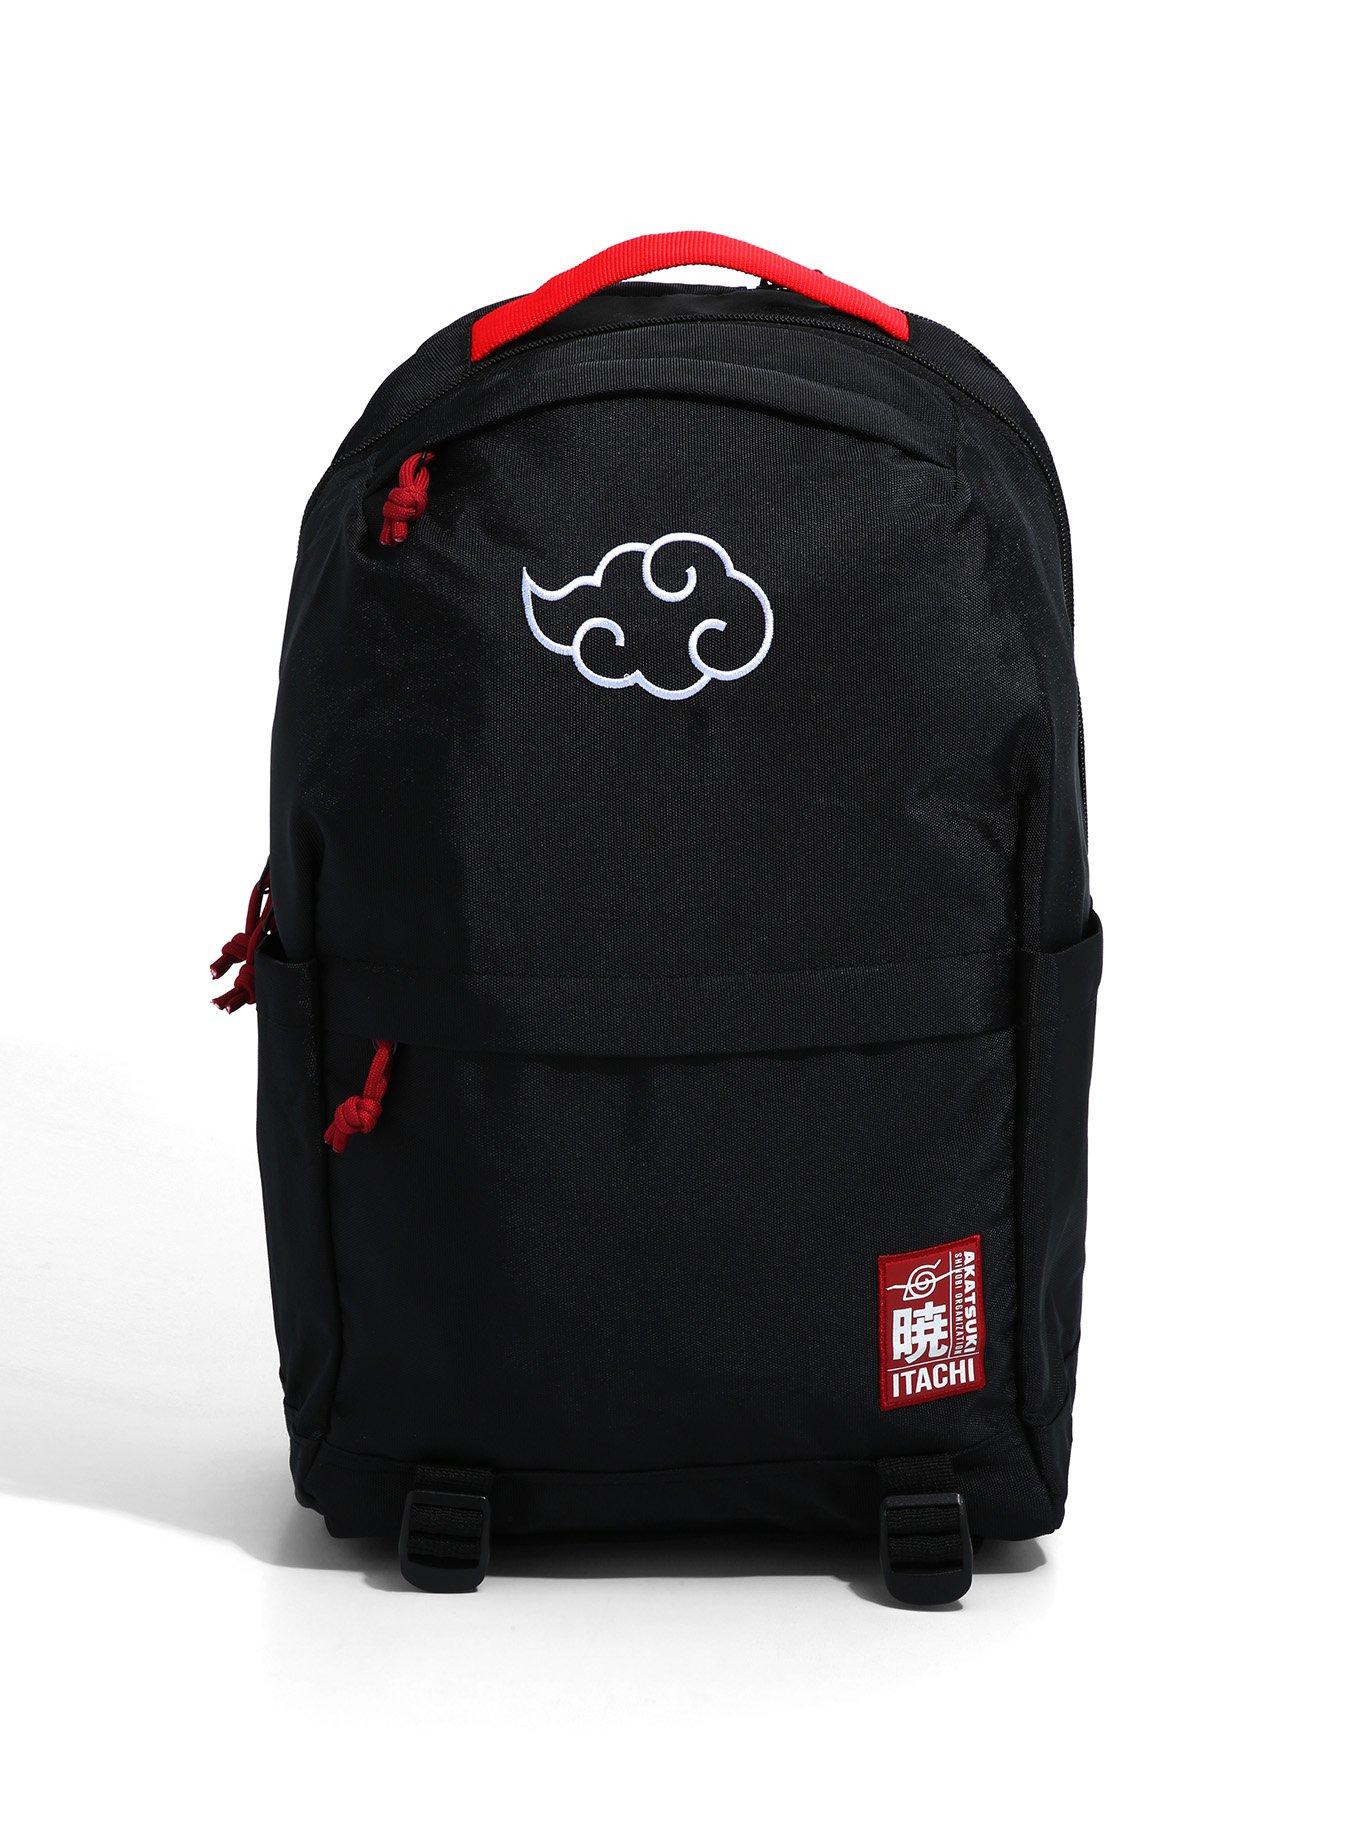 Naruto™ Canvas Backpack for Kids